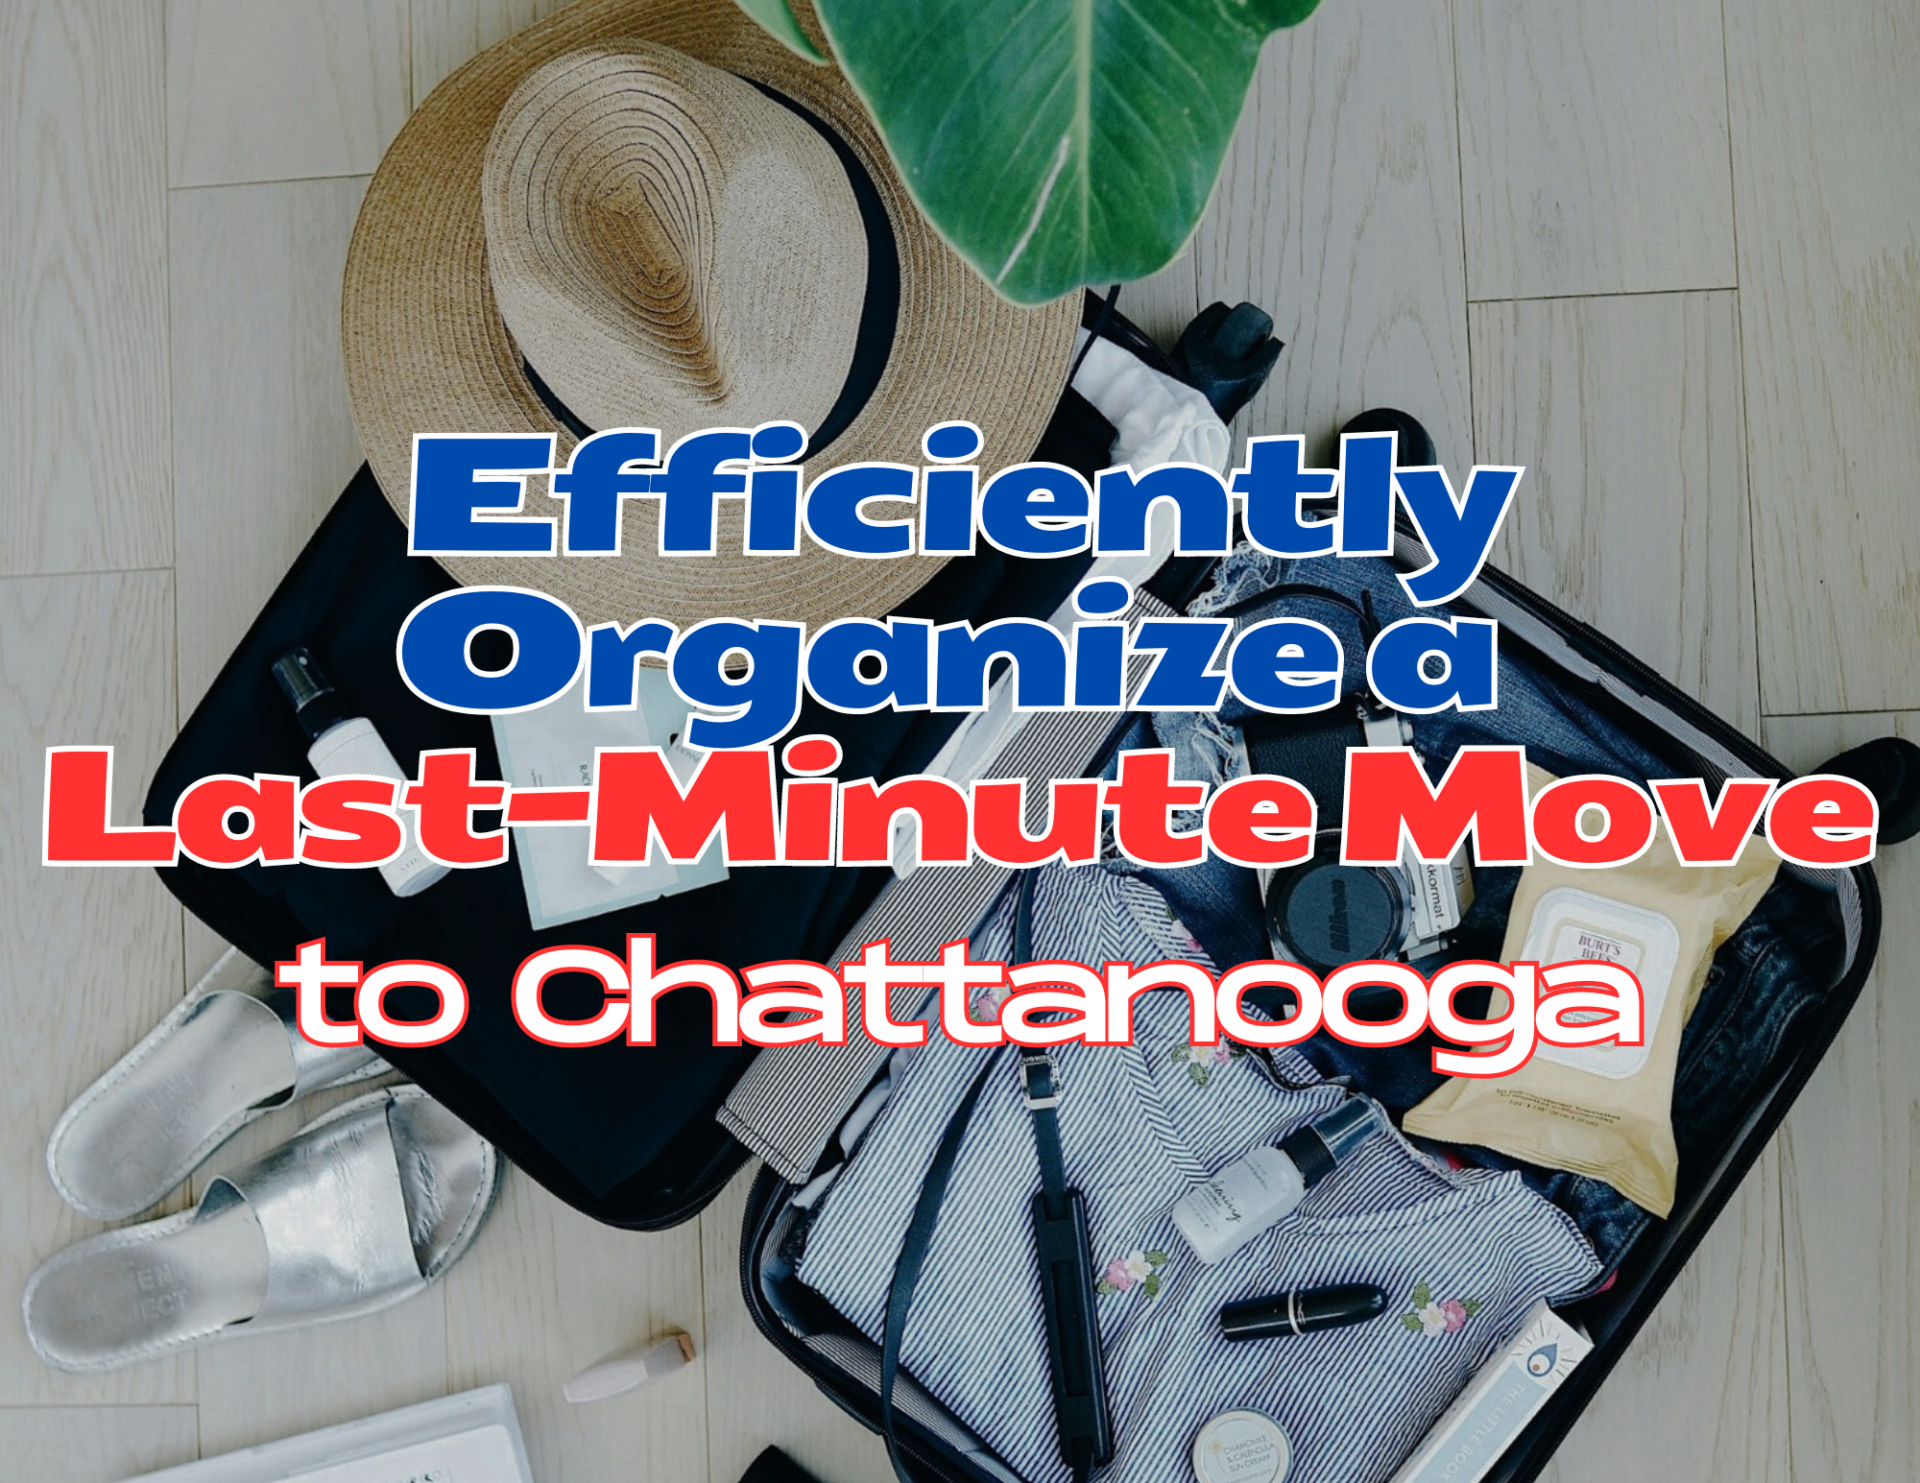 Organize a Last Minute Move Chattanooga How to Efficiently Organize a Last-Minute Move to Chattanooga?